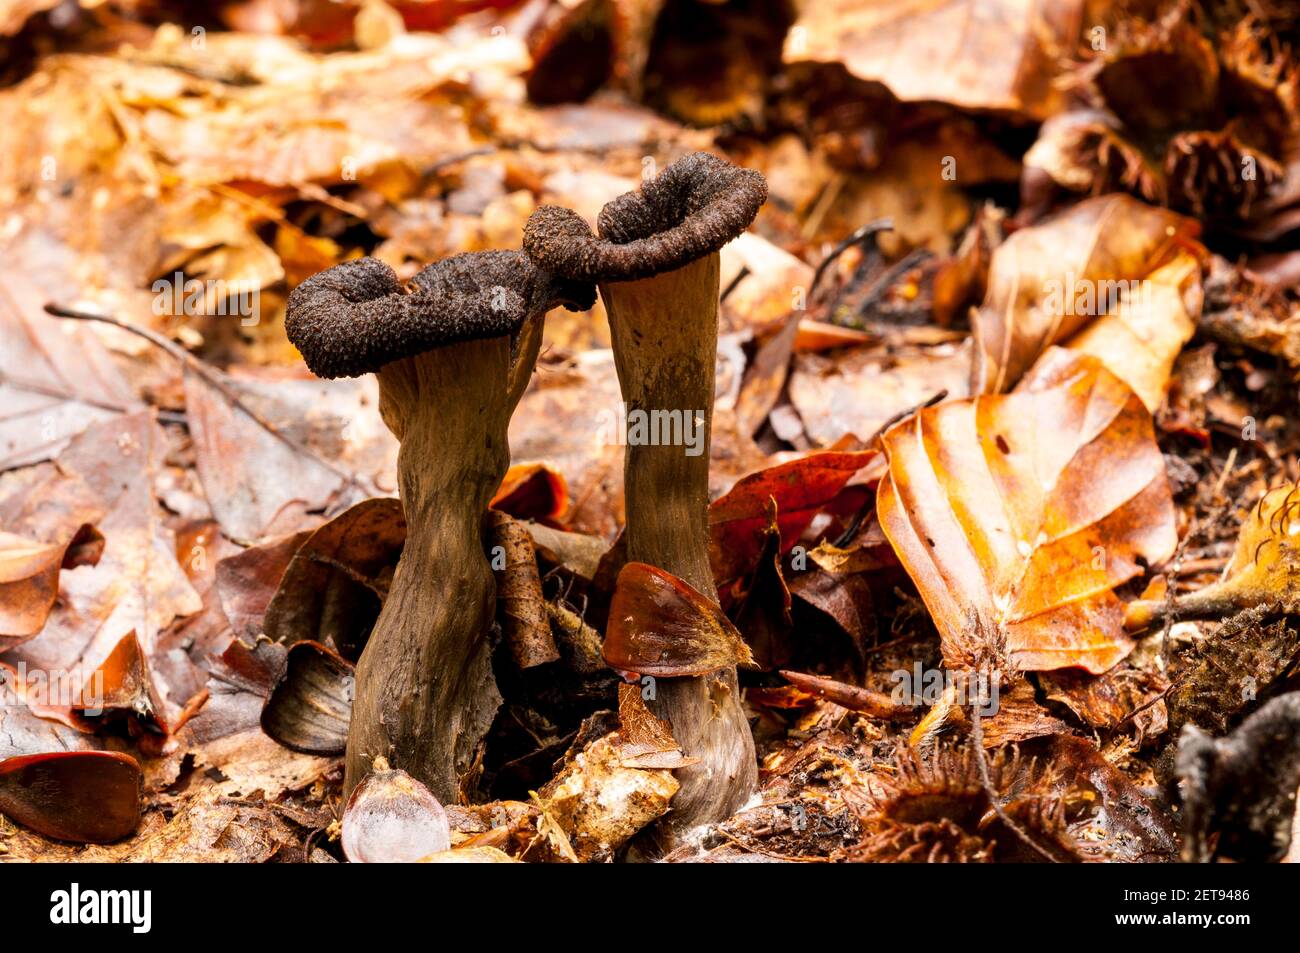 Fruiting bodies of the horn of plenty fungus (Craterellus cornucopioides) growing amidst fallen beech leaves in the New Forest, Hampshire. October. Stock Photo